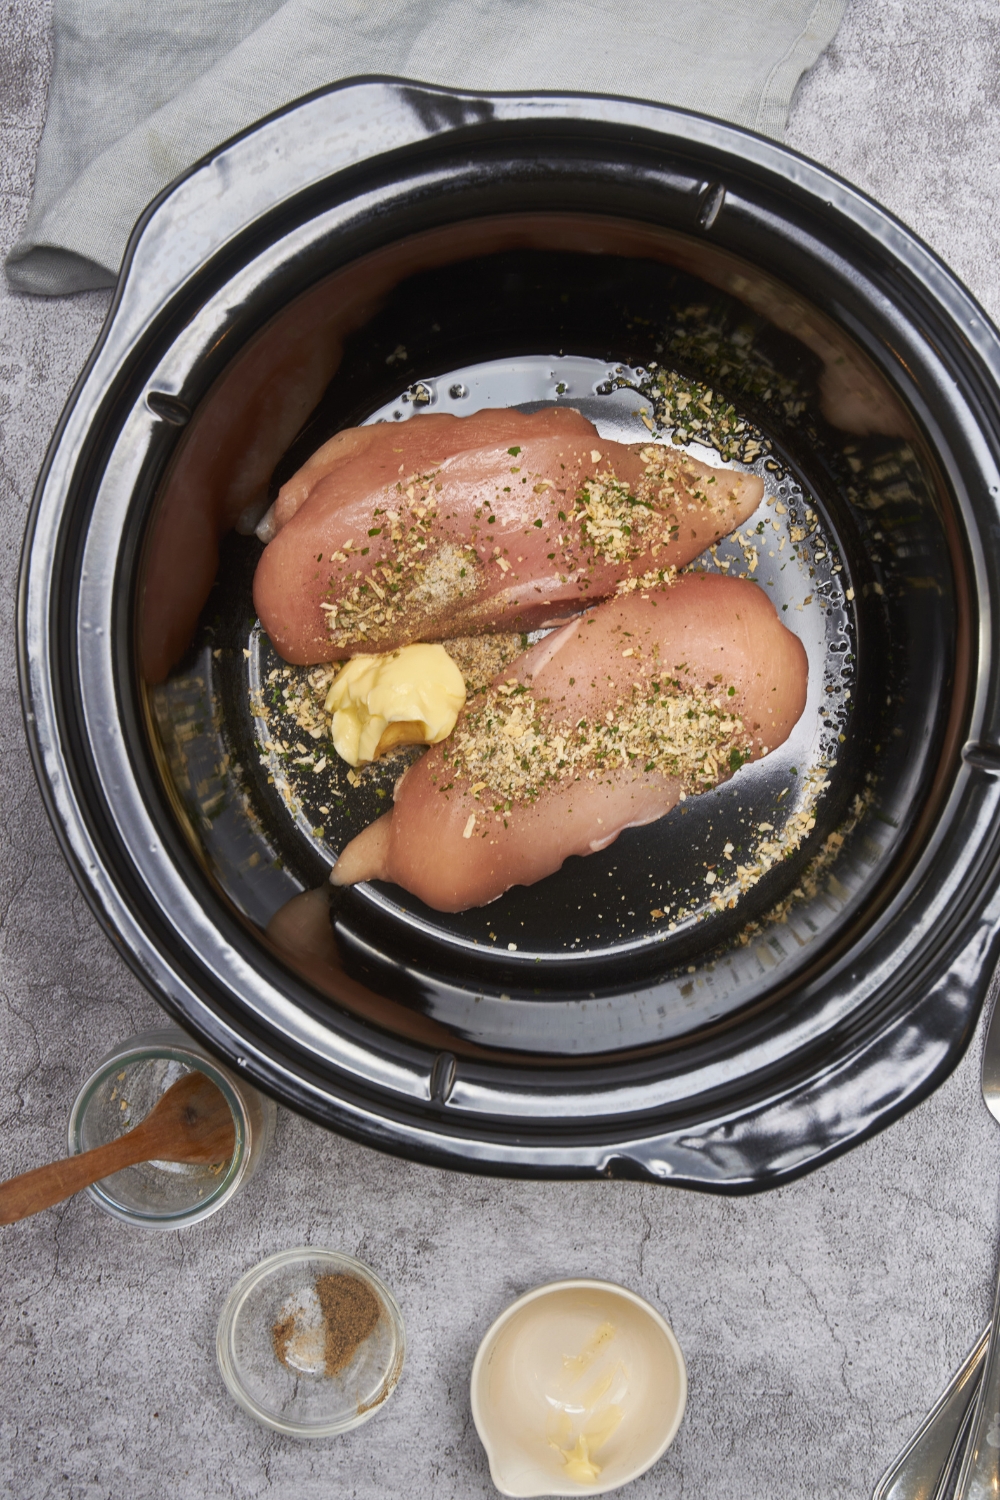 Two raw chicken breasts covered in seasoning in the bottom of a crockpot with a scoop of butter.